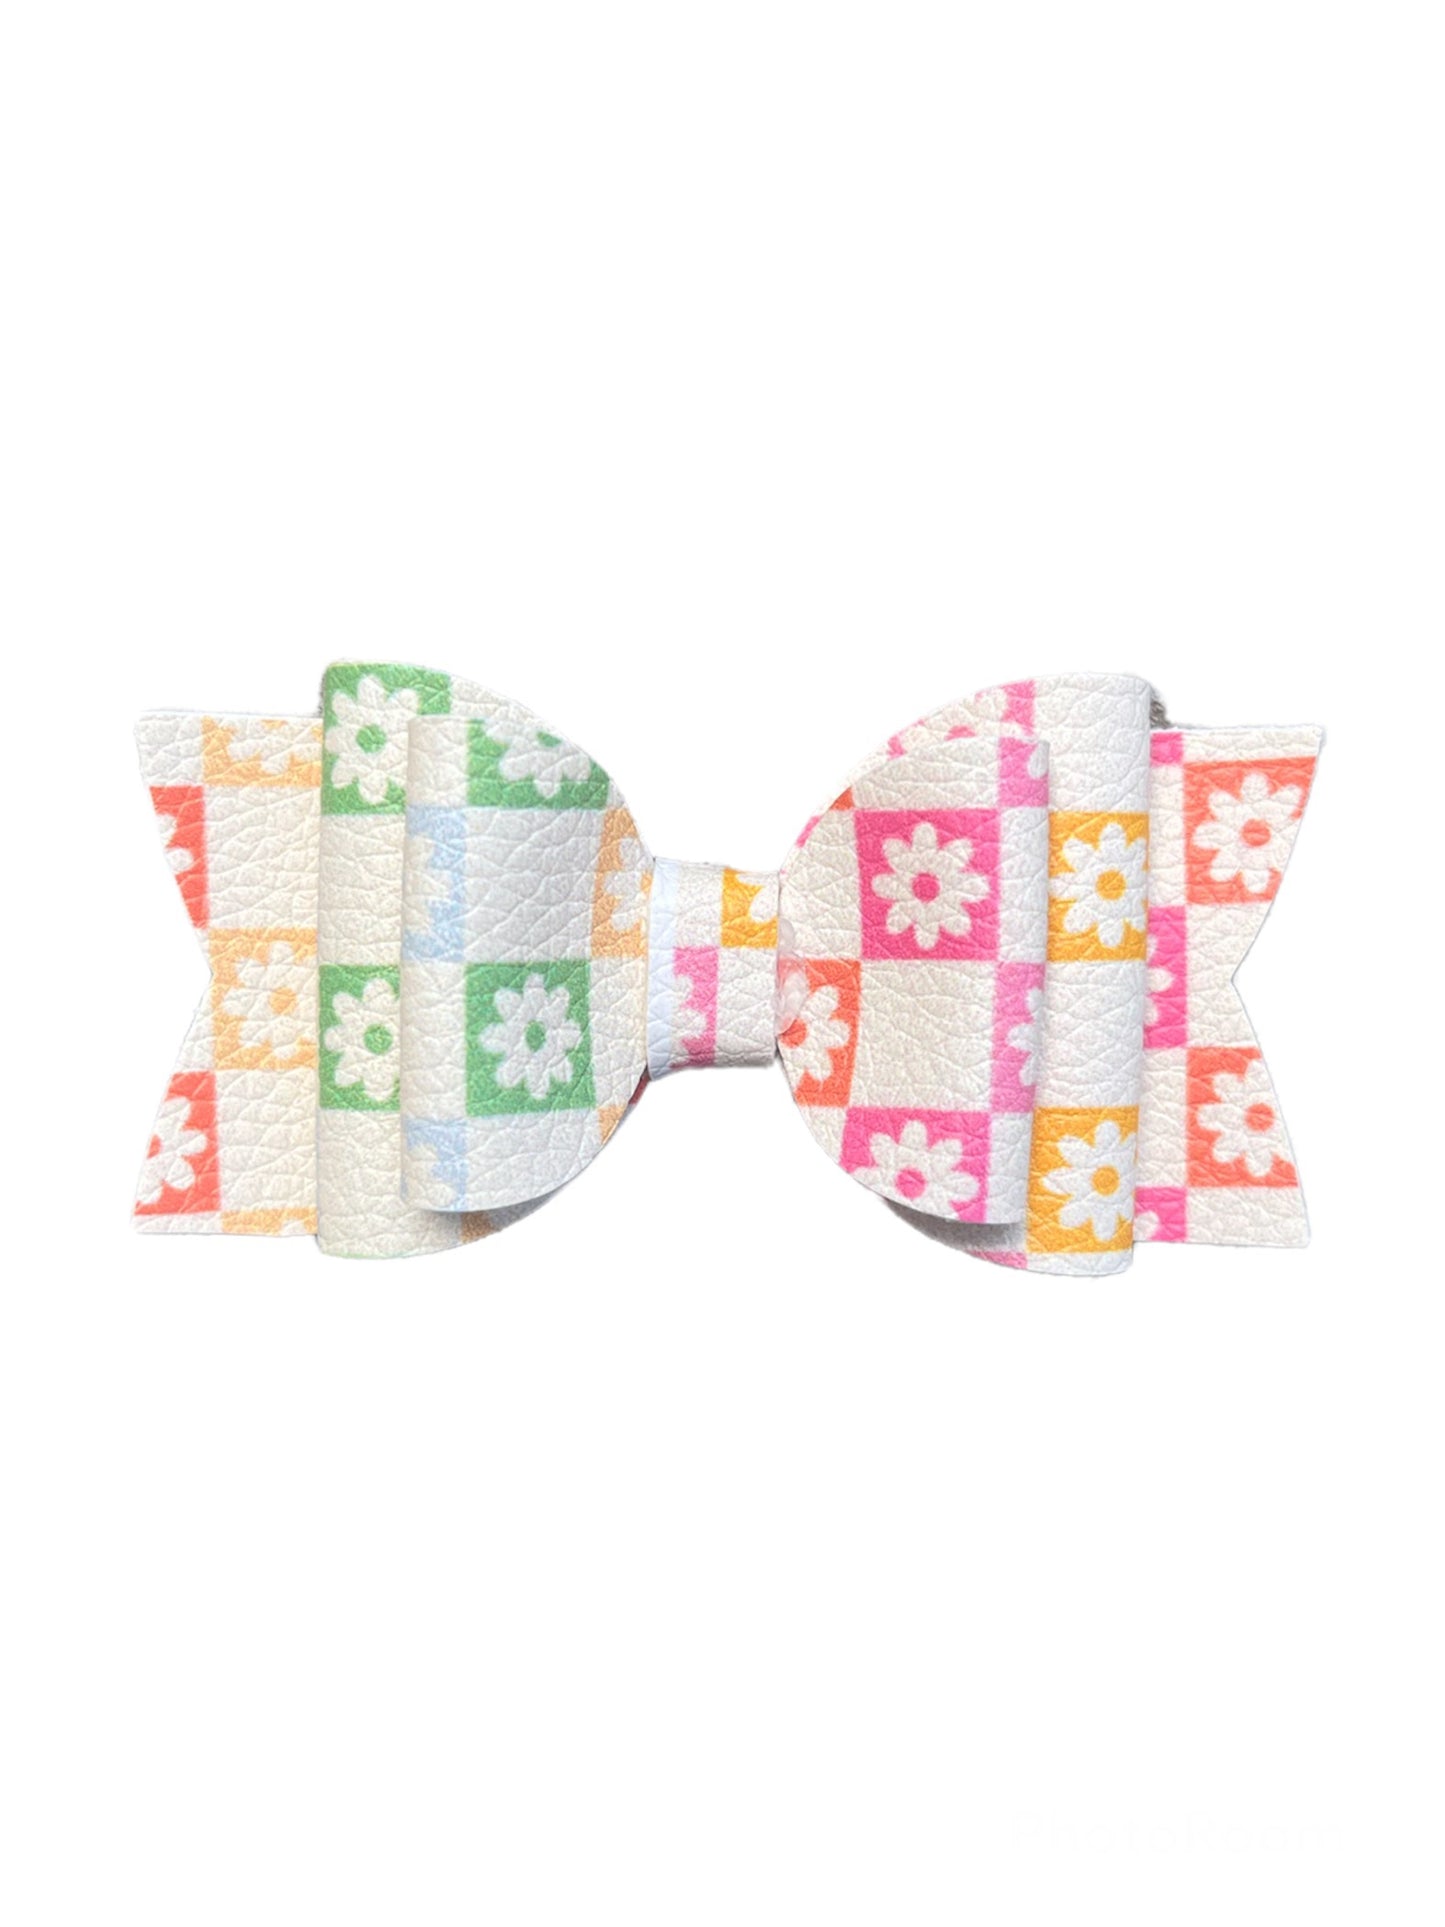 Checkered Floral Classic Bow!